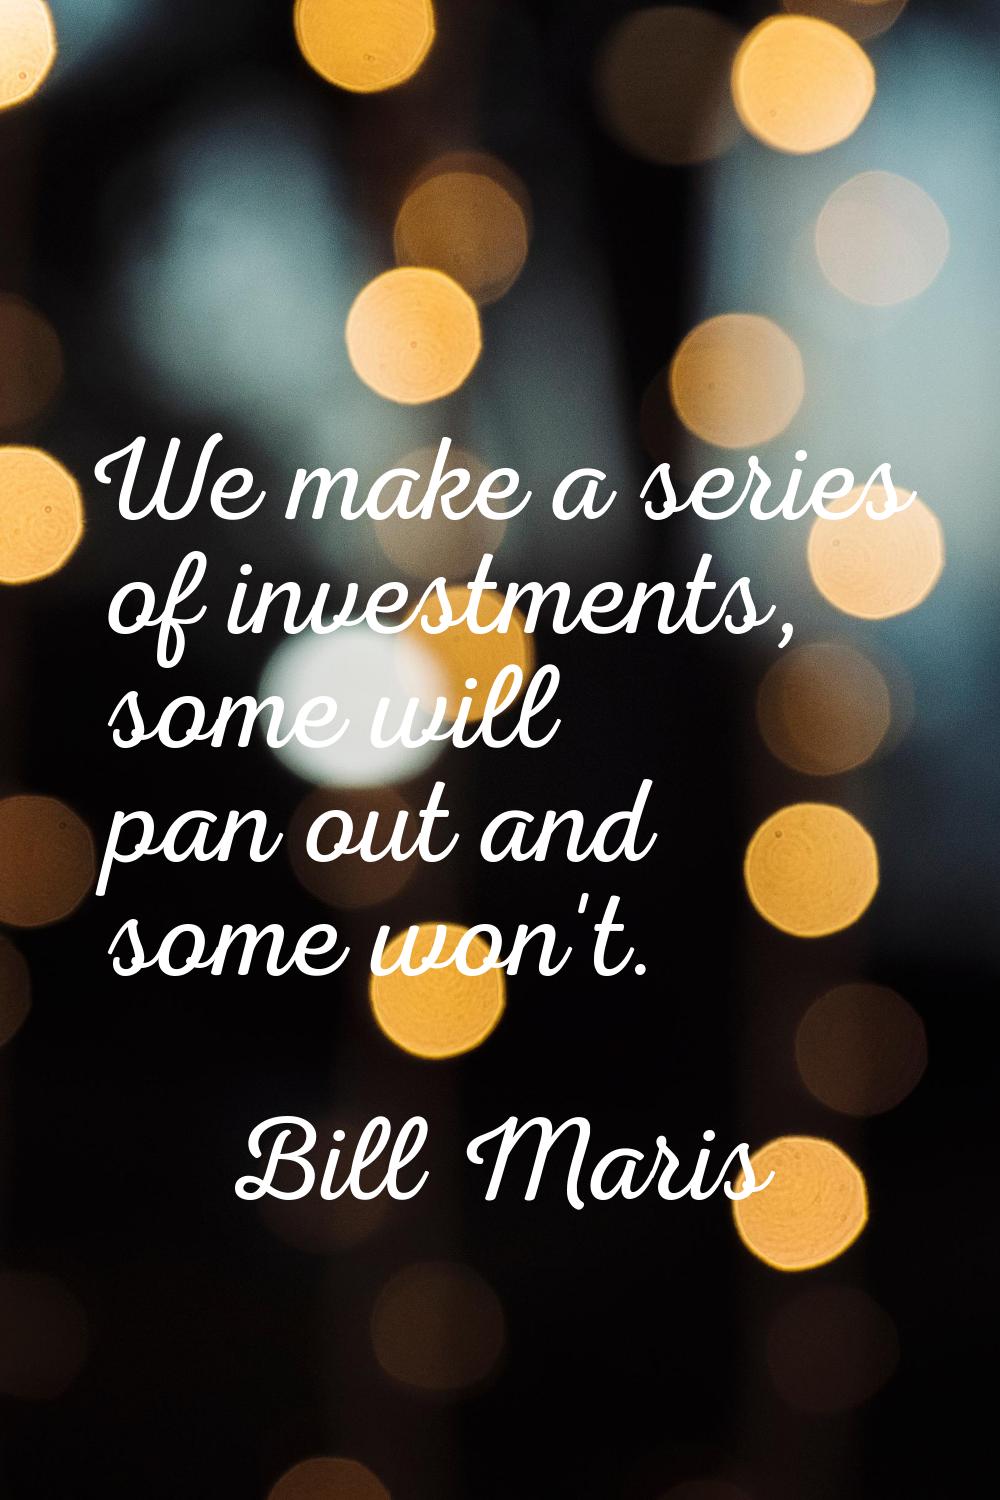 We make a series of investments, some will pan out and some won't.